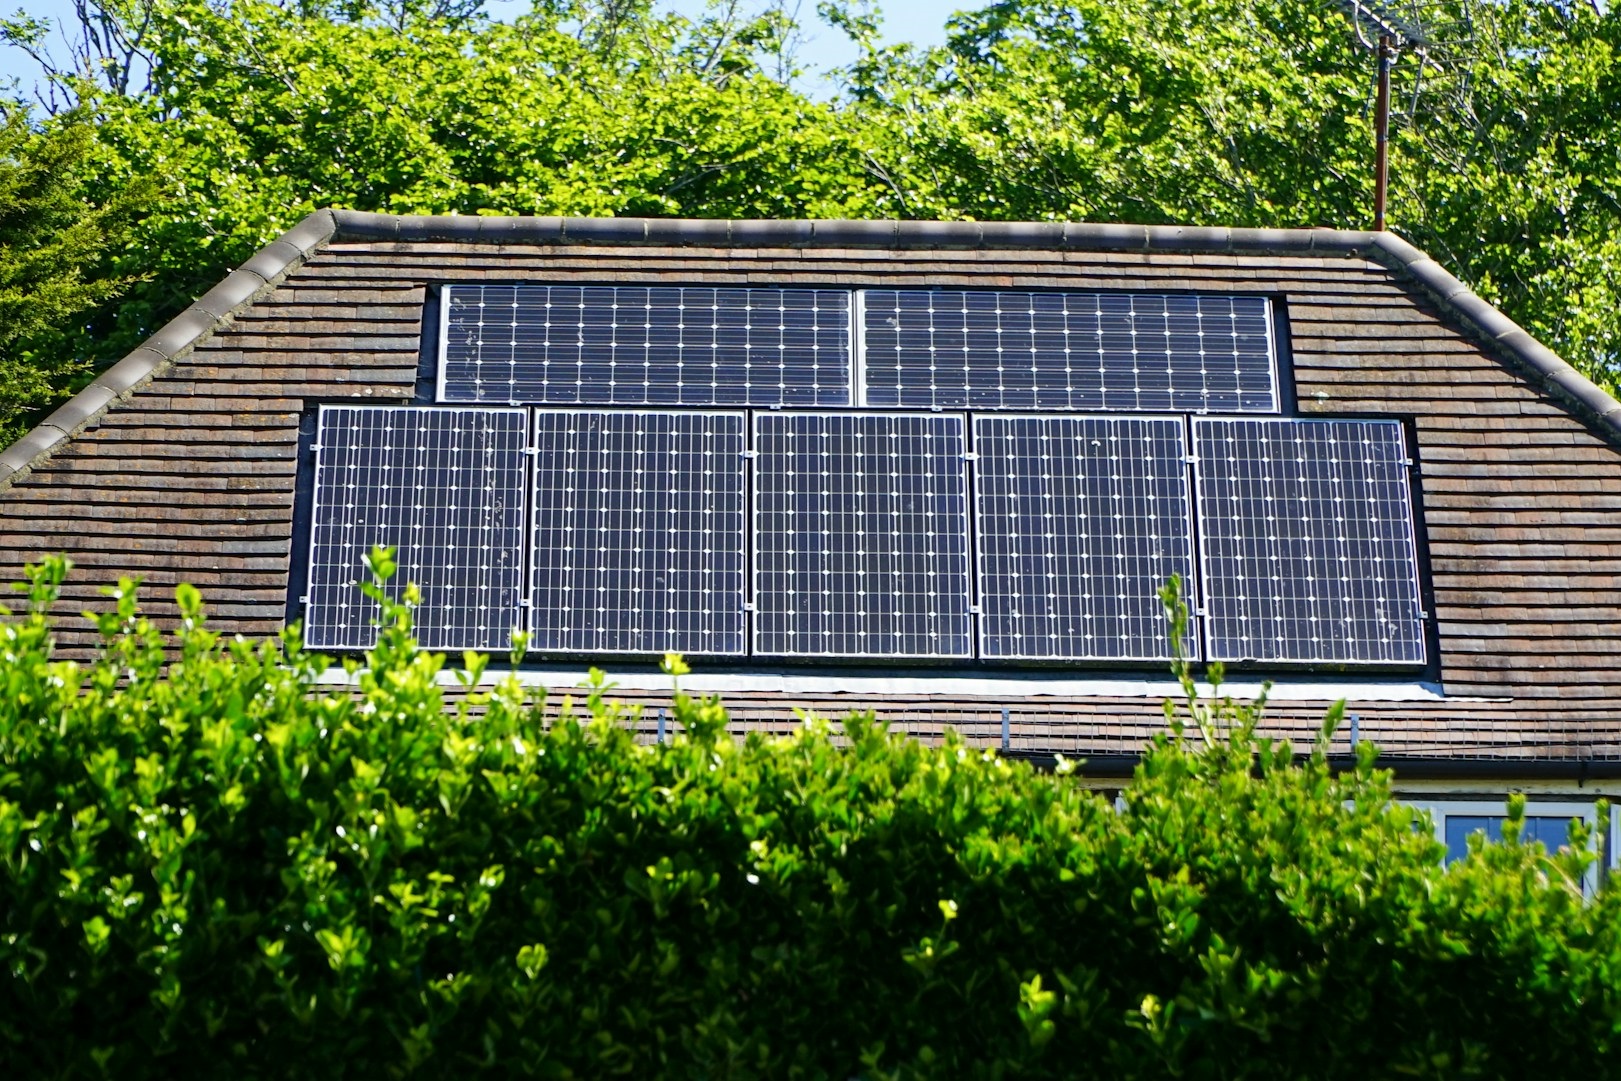 An Affordable Way to Harness the Sun: Solar Leasing